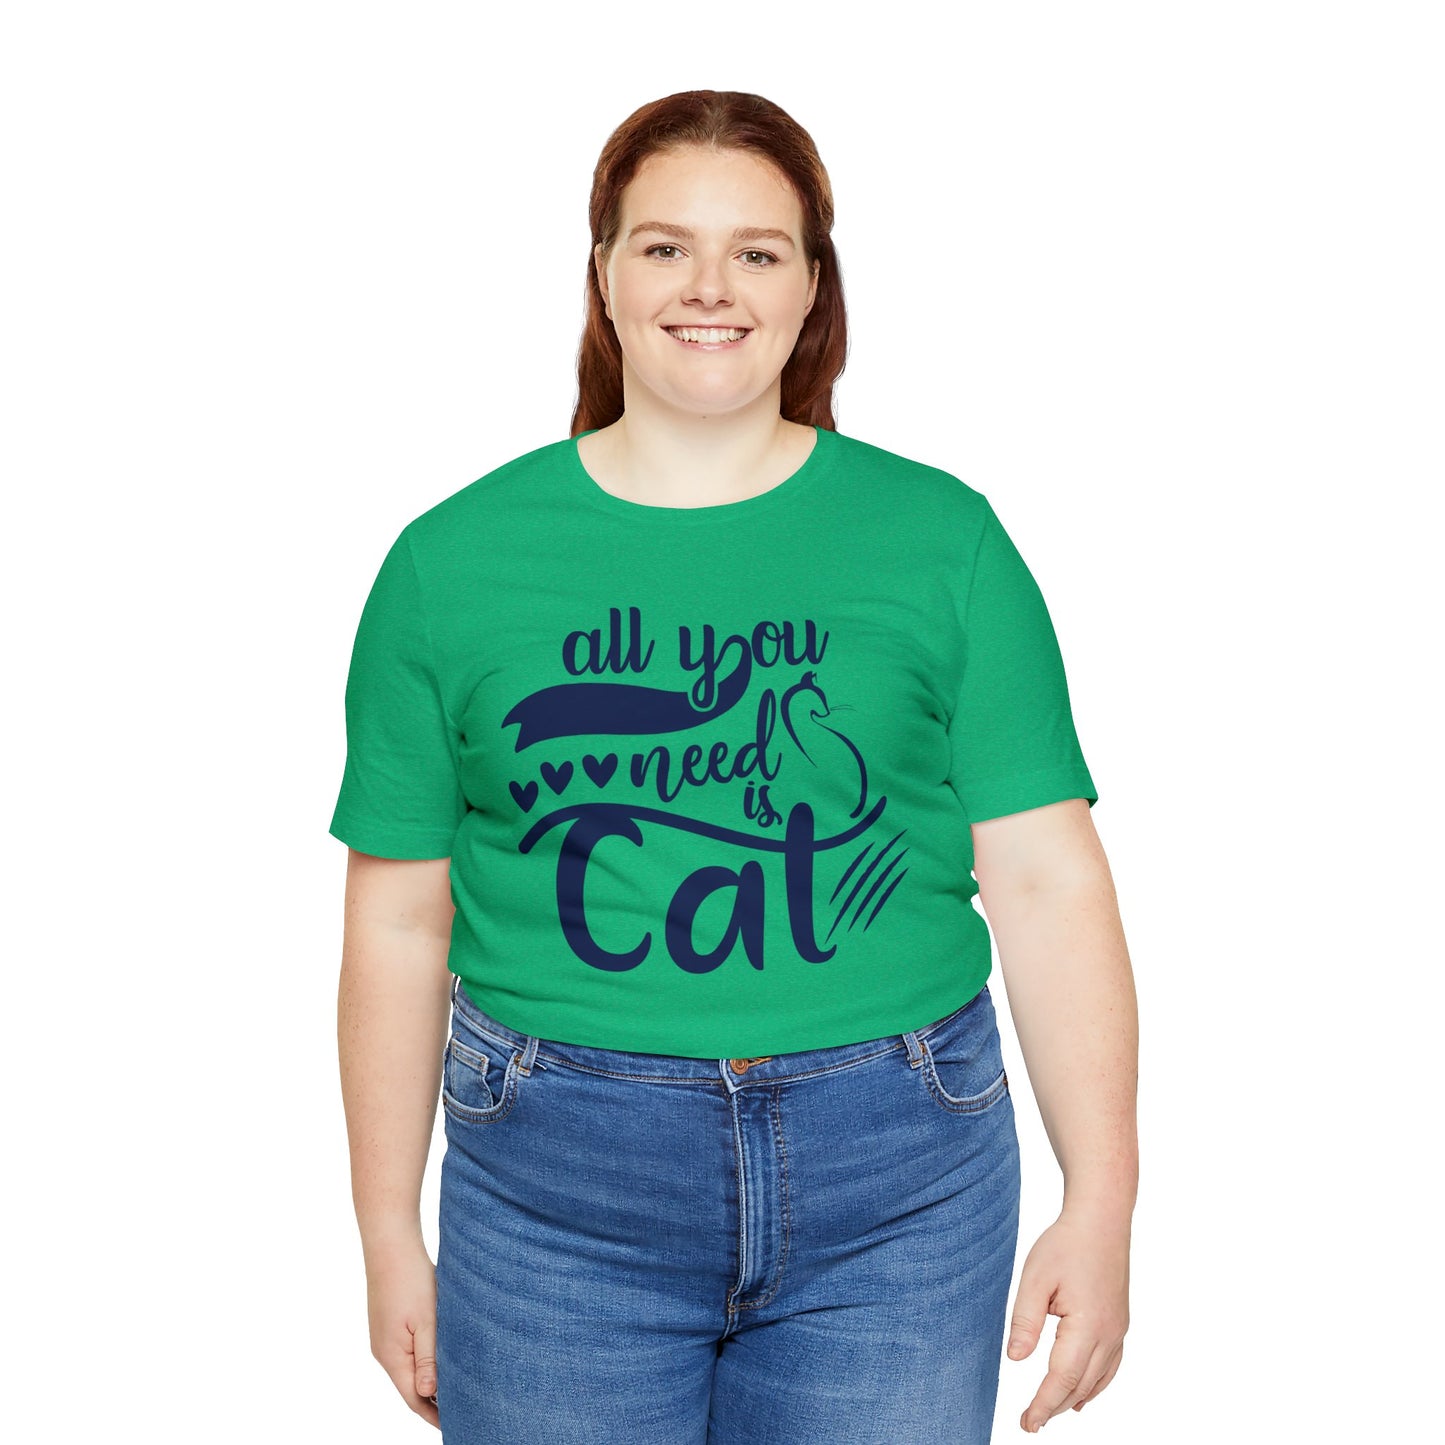 All You Need Is Cat T-Shirts - Trendy Feline Fashion for Cat Lovers